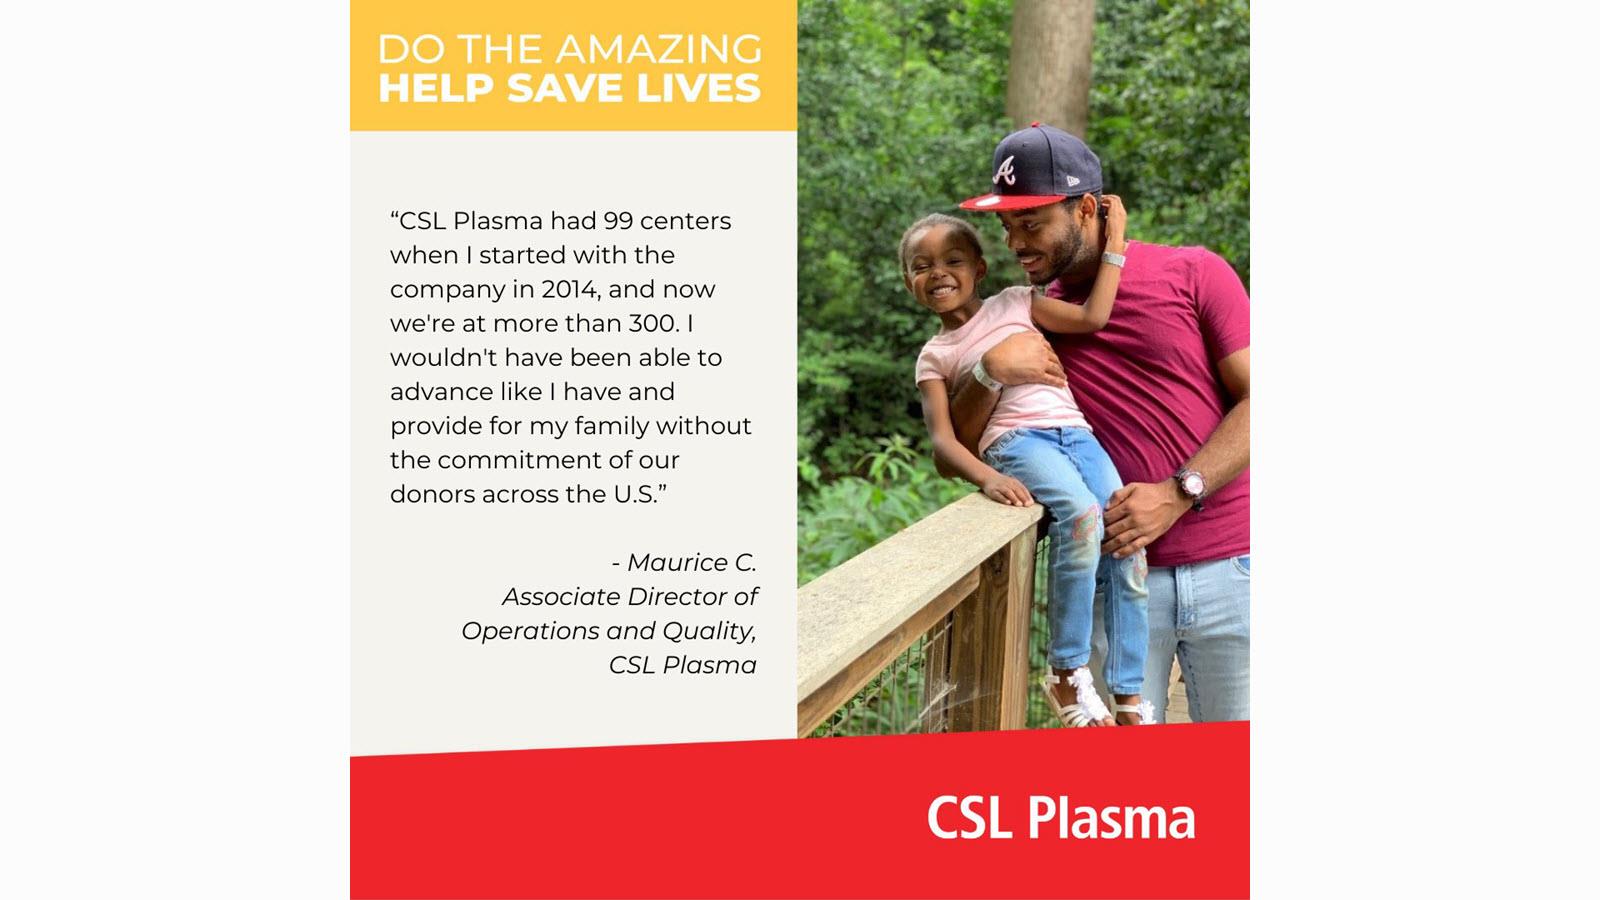 Maurice has seen the number of CSL Plasma centers grow from 99 to 300.